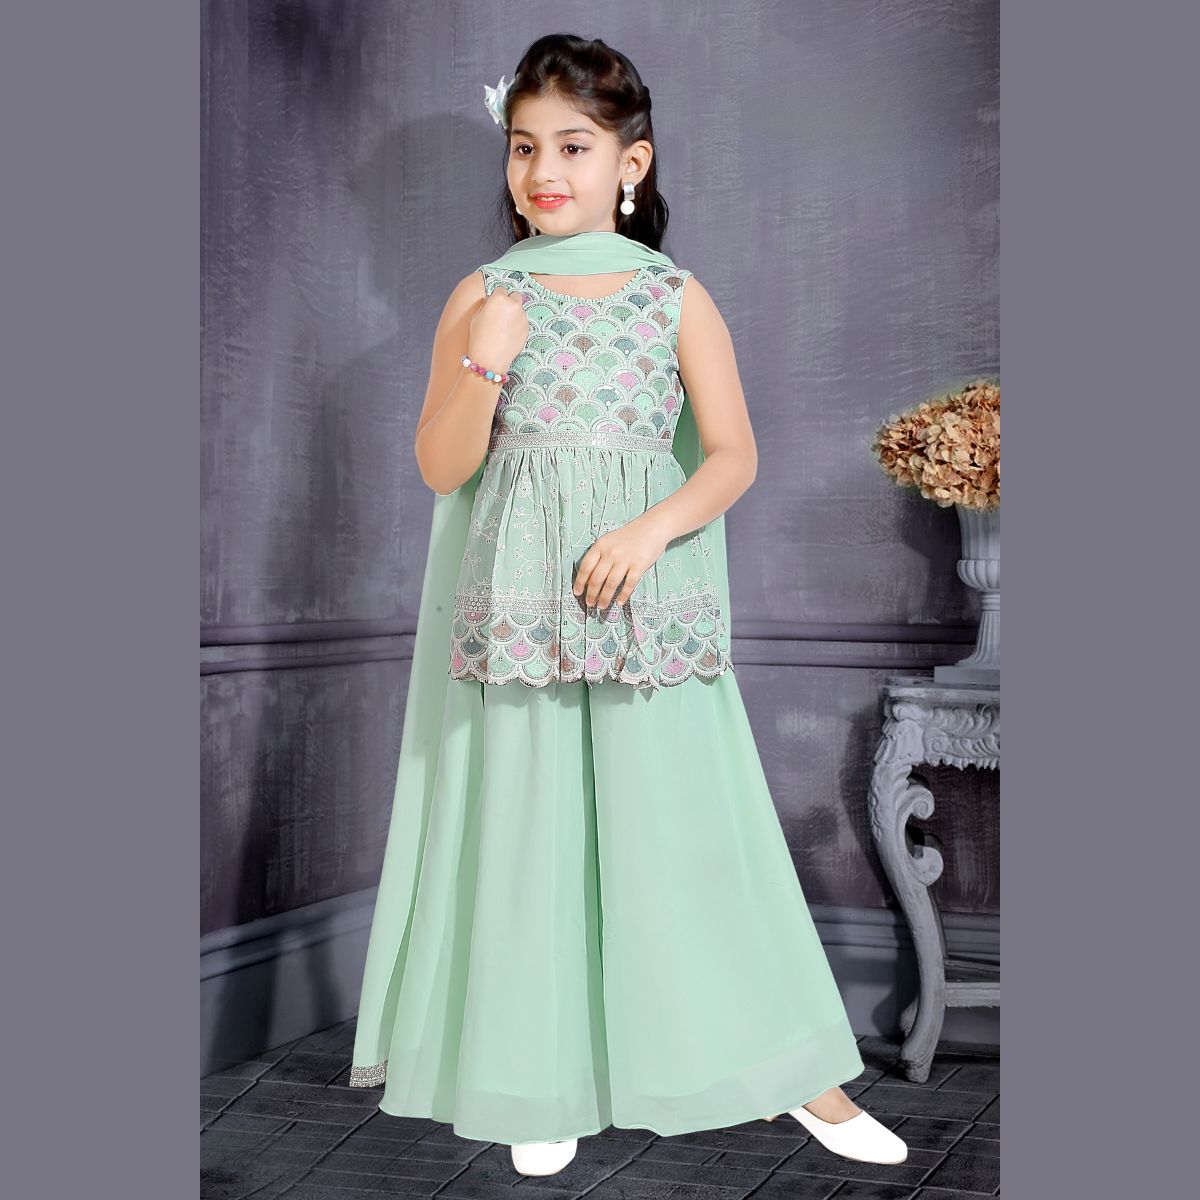 Buy White Button Girl's Net Salwar Suit (baby Salwar-3-4 Years_yellow, Sky  Blue_3 Years-4 Years) at Amazon.in